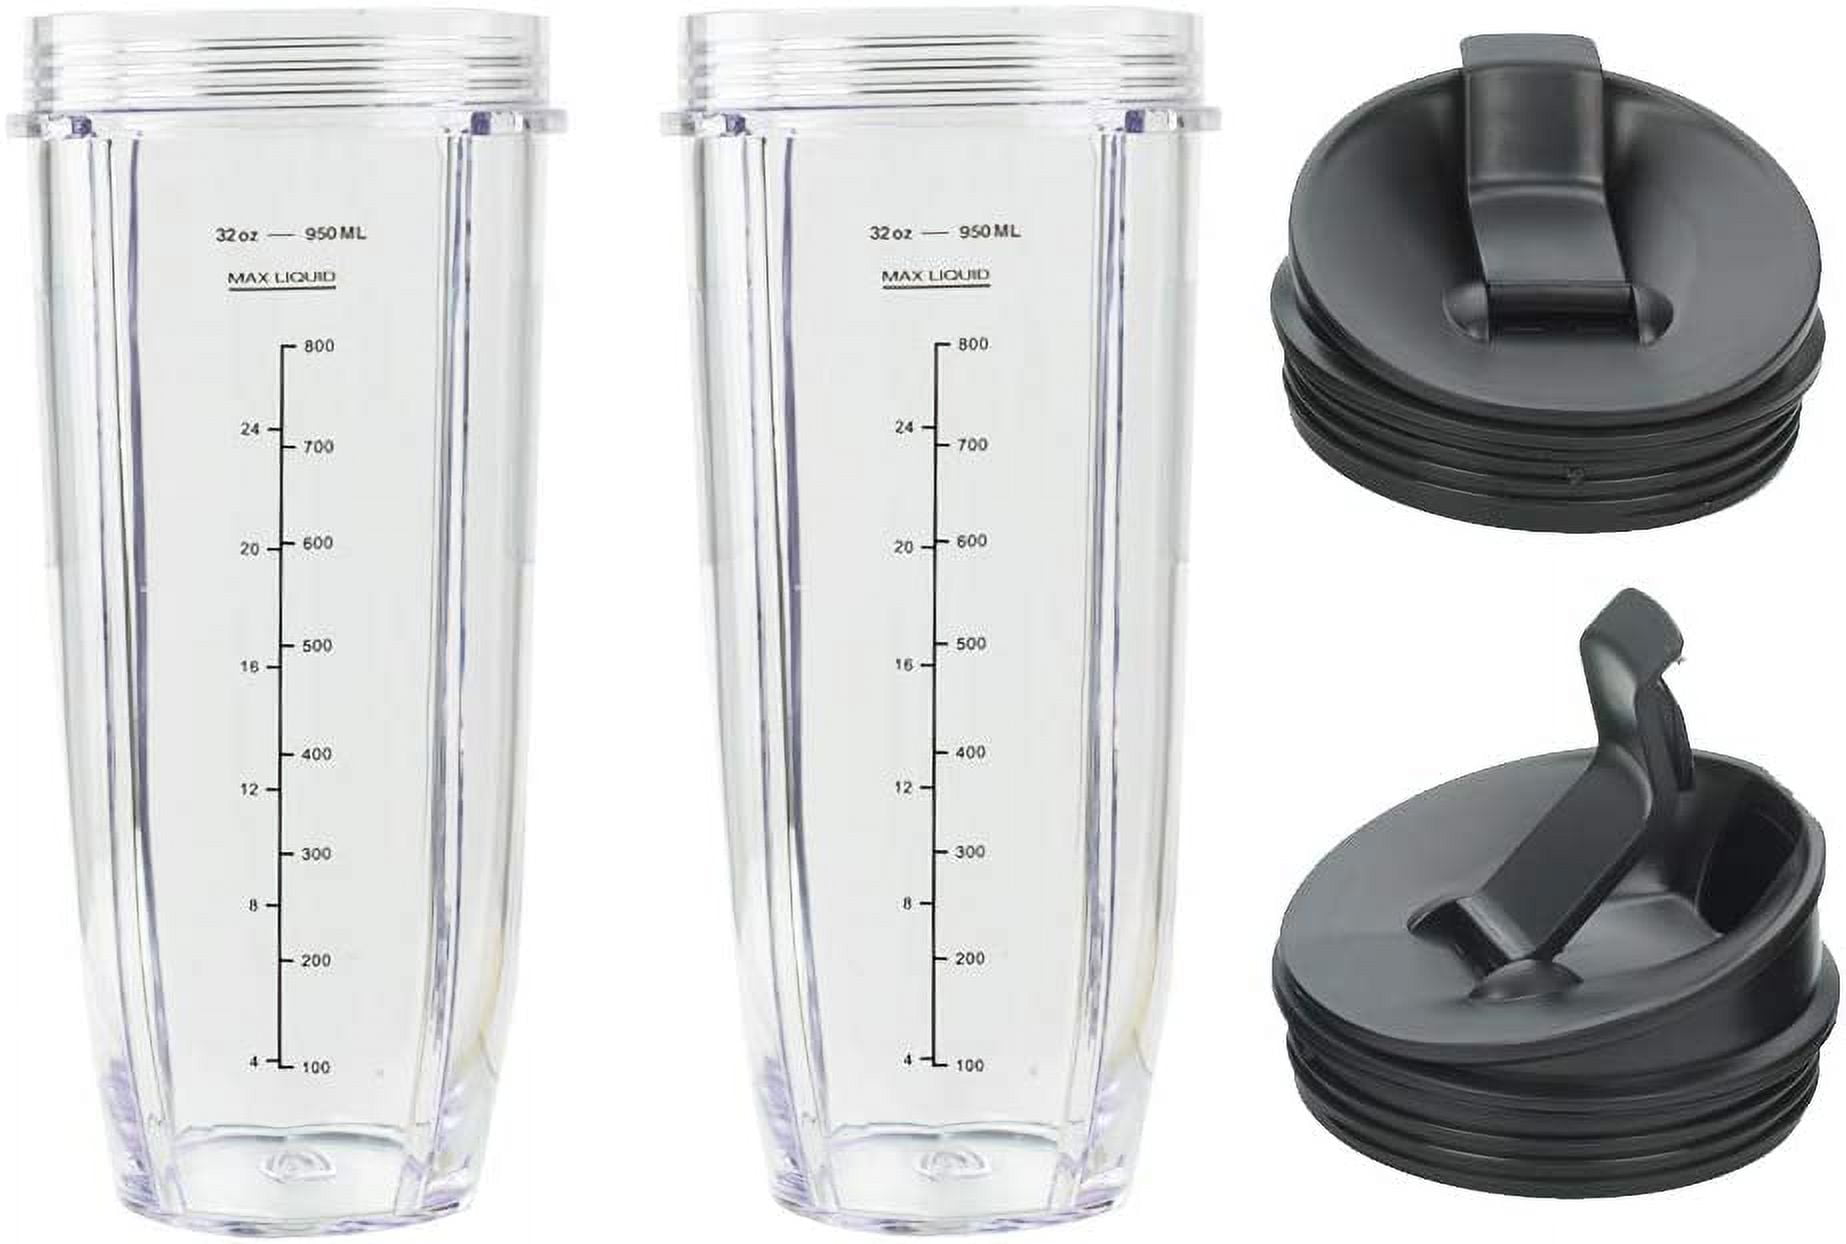 32 oz Cup with Sip & Seal Lid Replacement Parts 407KKU641 408KKU641  Compatible with Nutri Ninja Auto-iQ BL480 BL640 CT680 Blenders - Felji